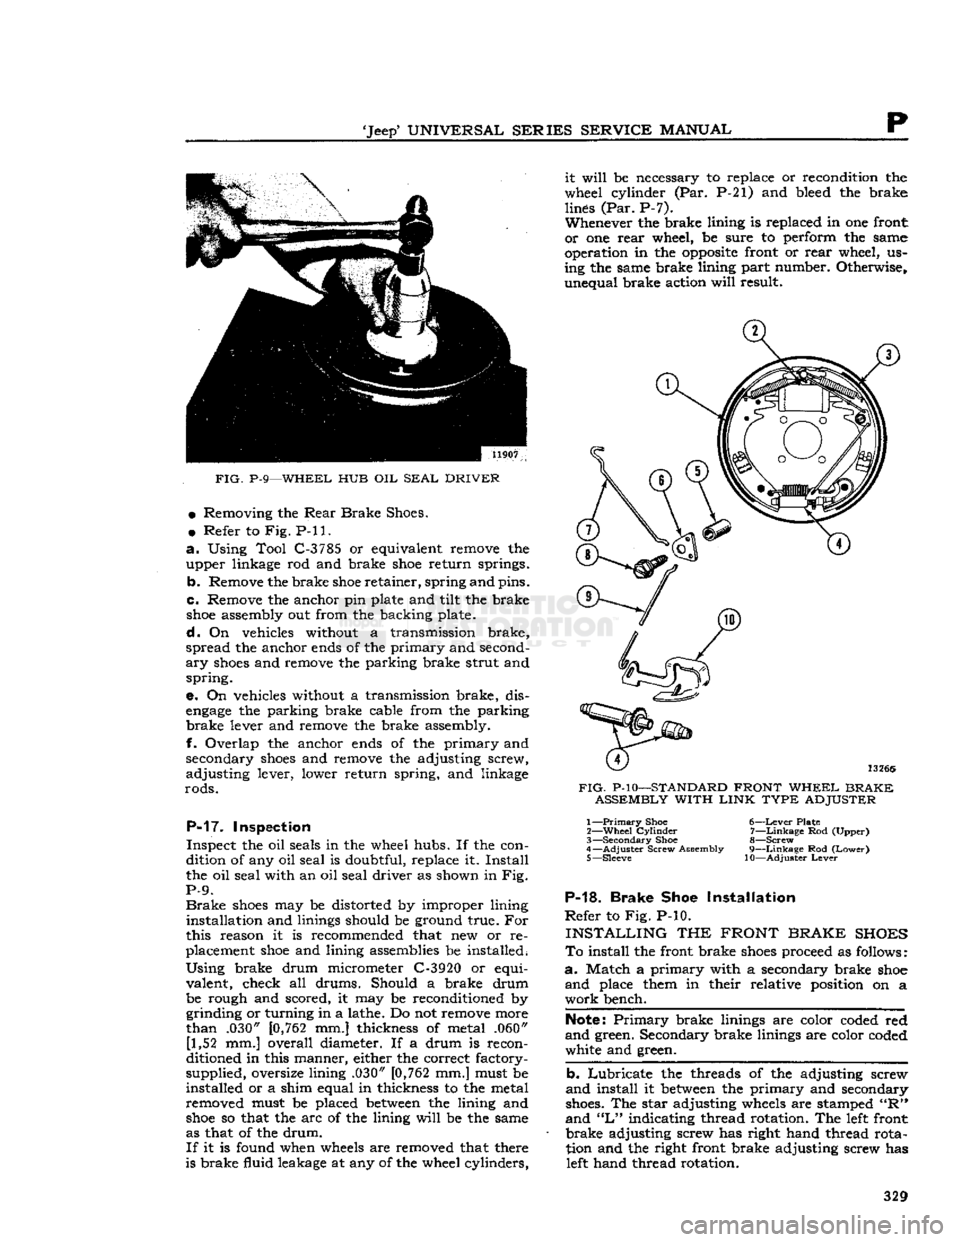 JEEP CJ 1953  Service Manual 
Jeep
 UNIVERSAL
 SERIES
 SERVICE
 MANUAL 

P 

FIG.
 P-9—WHEEL HUB OIL
 SEAL
 DRIVER 
 •
 Removing the
 Rear
 Brake
 Shoes. 

•
 Refer to Fig. P-ll. 

a.
 Using Tool C-3785 or equivalent remo